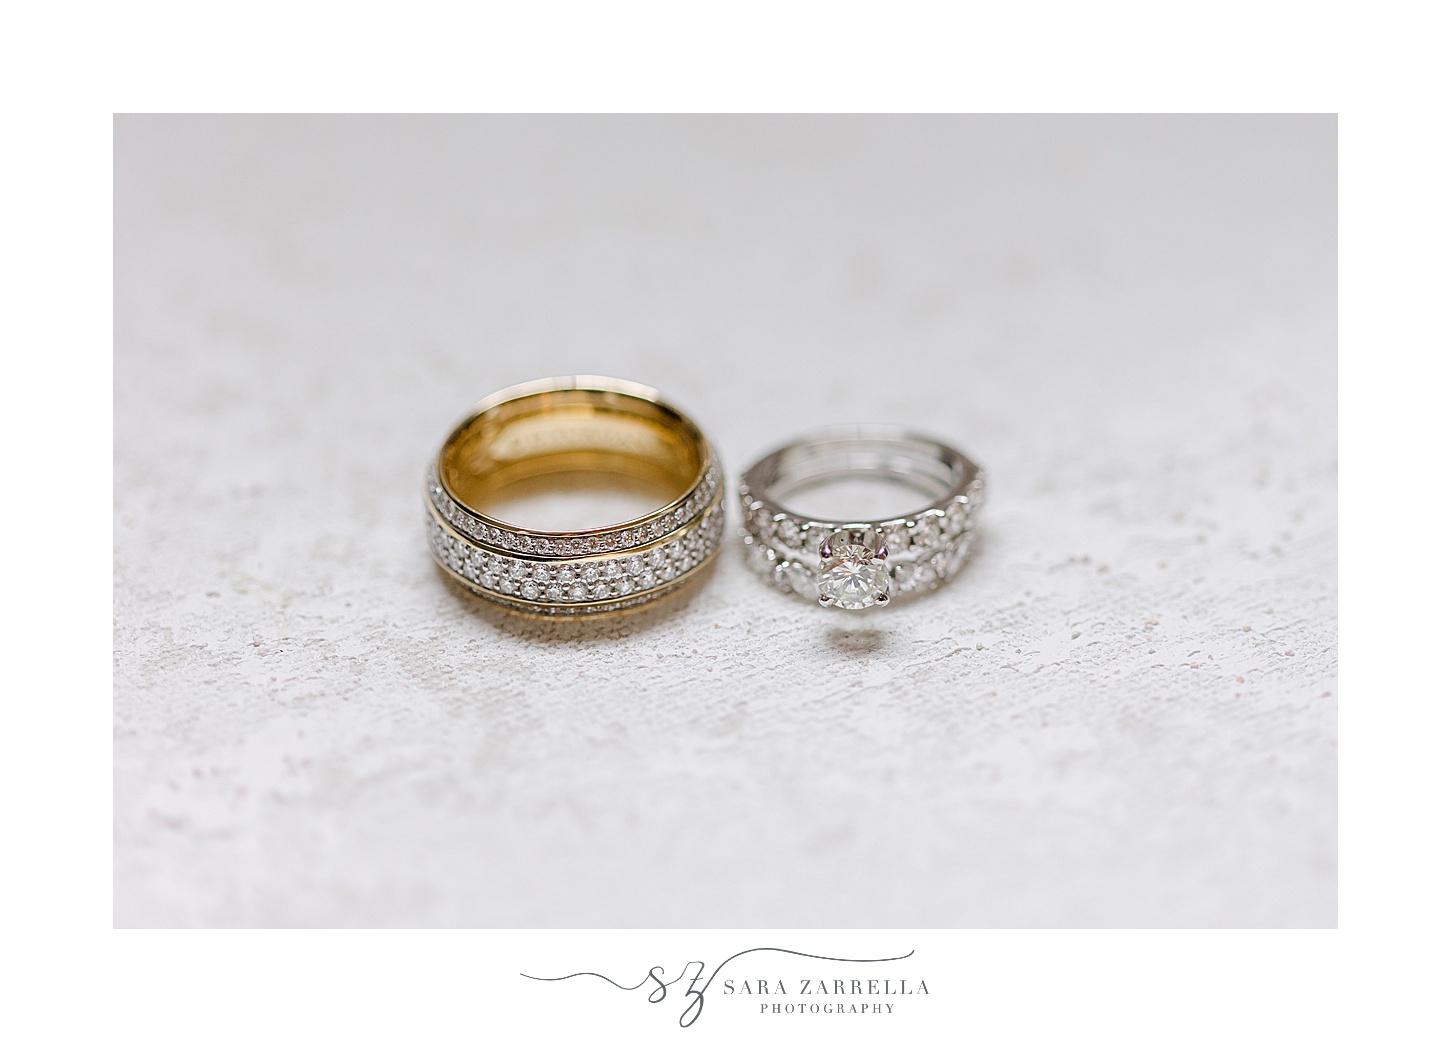 gold and diamond wedding bands rest on marble surface 